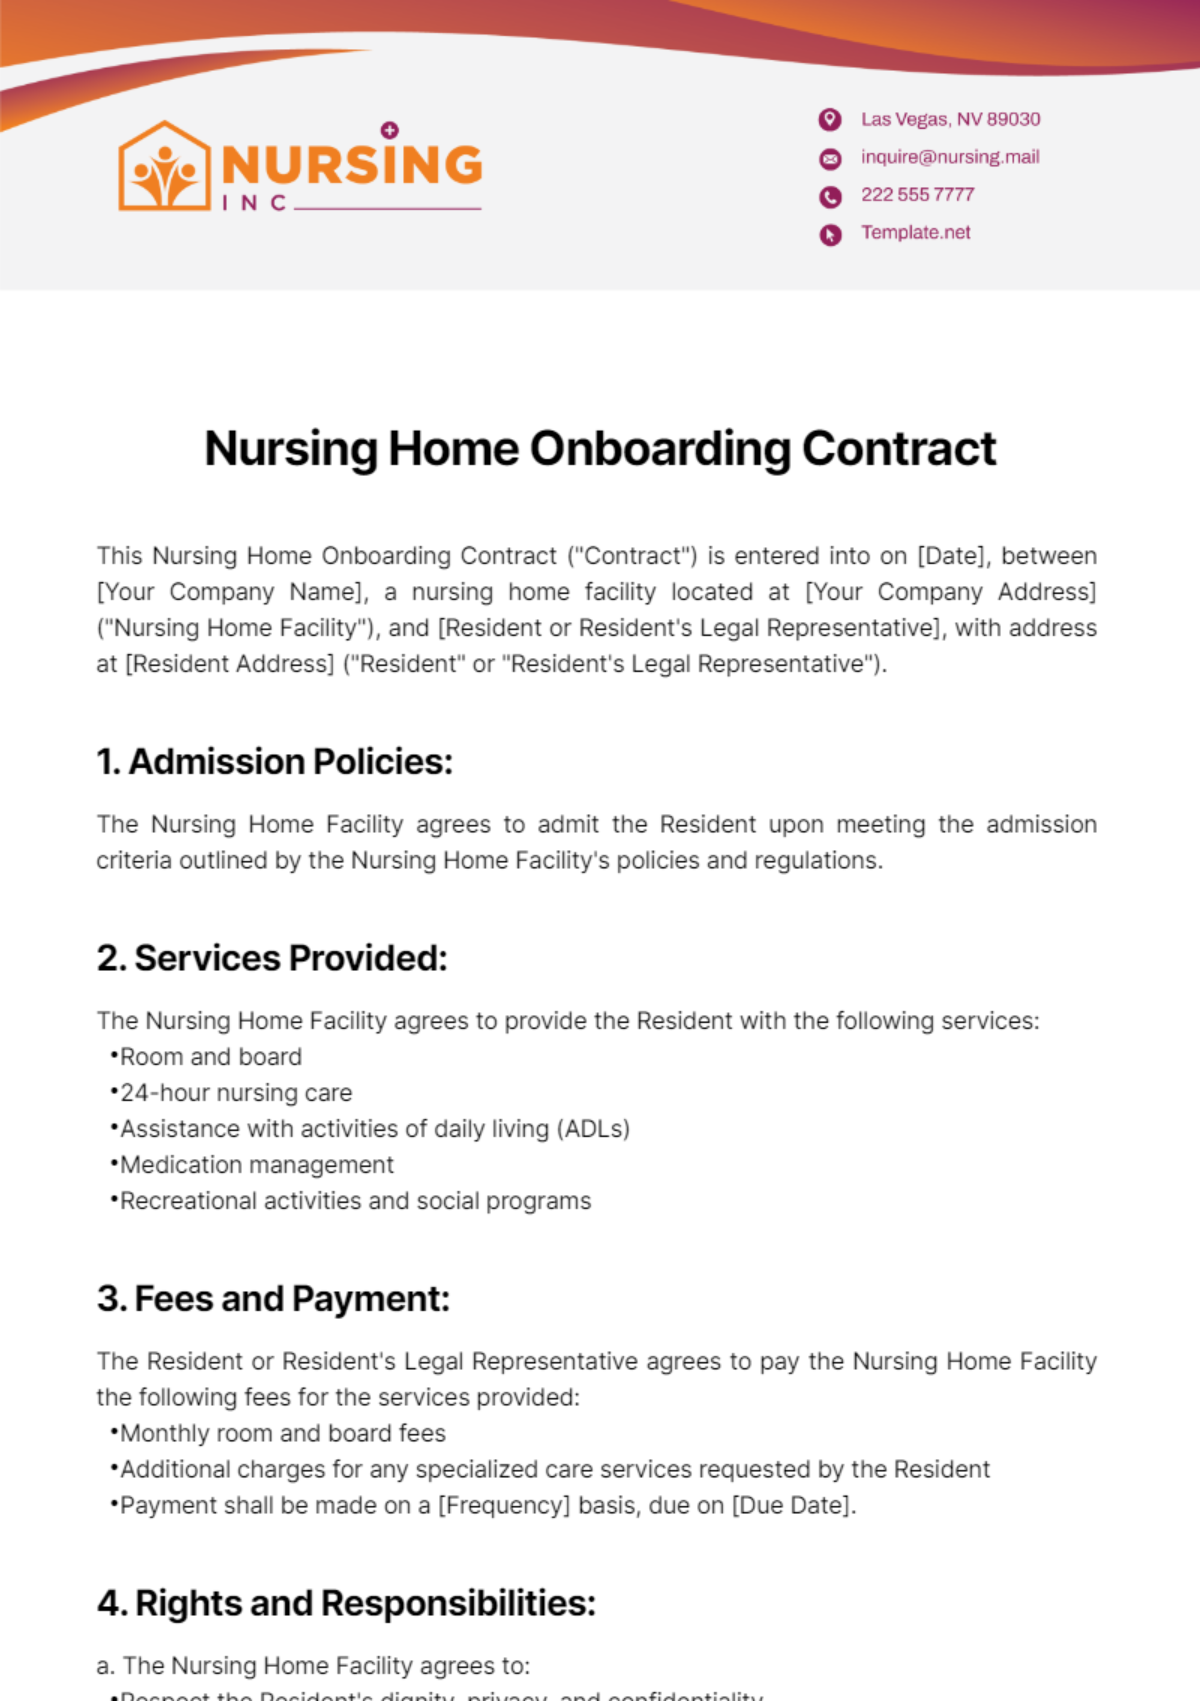 Free Nursing Home Onboarding Contract Template